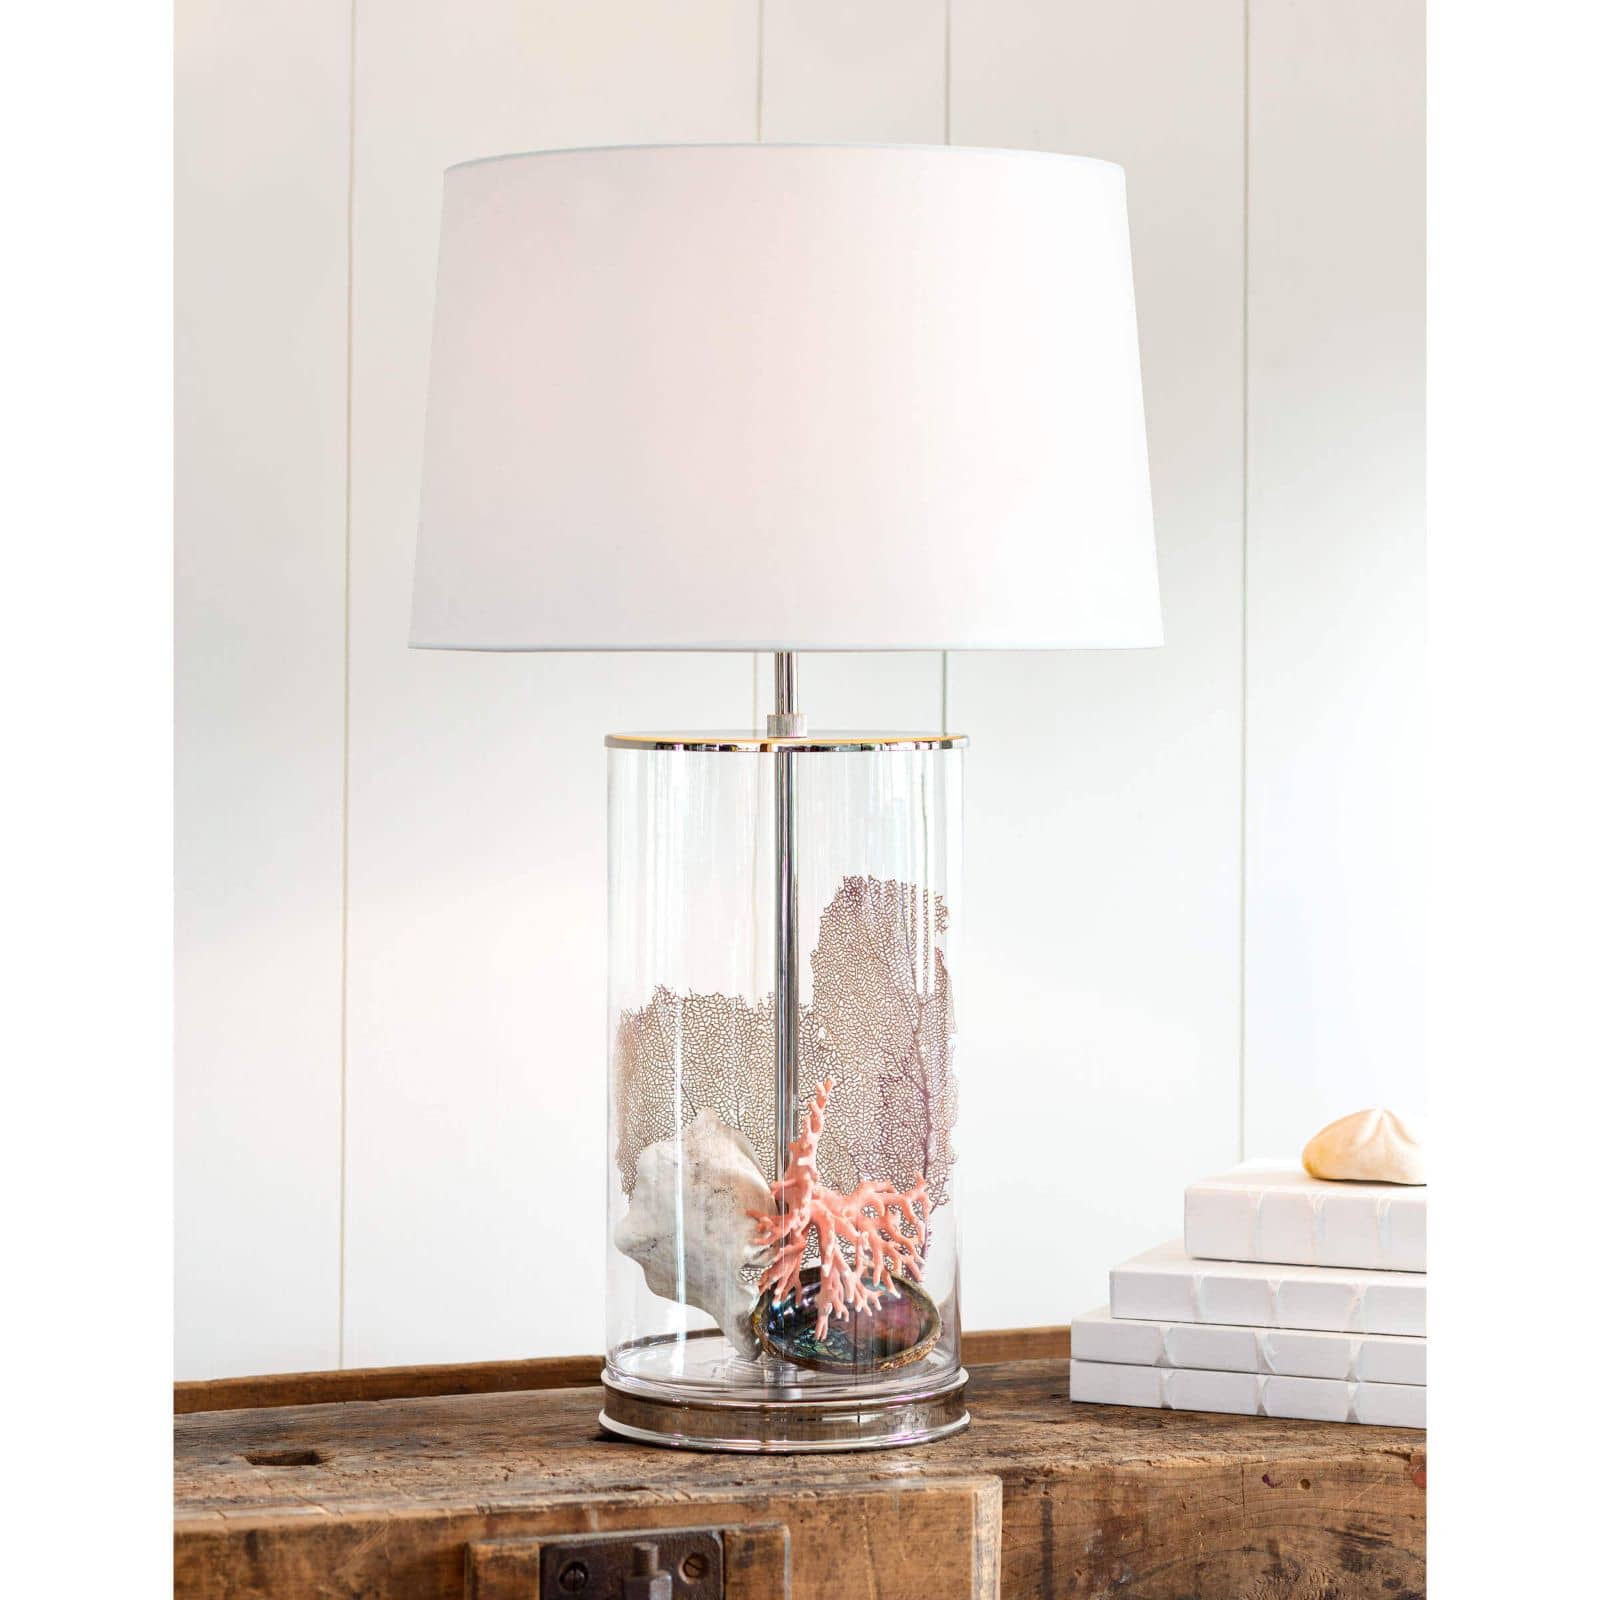 Magelian Glass Table Lamp in Polished Nickel by Coastal Living